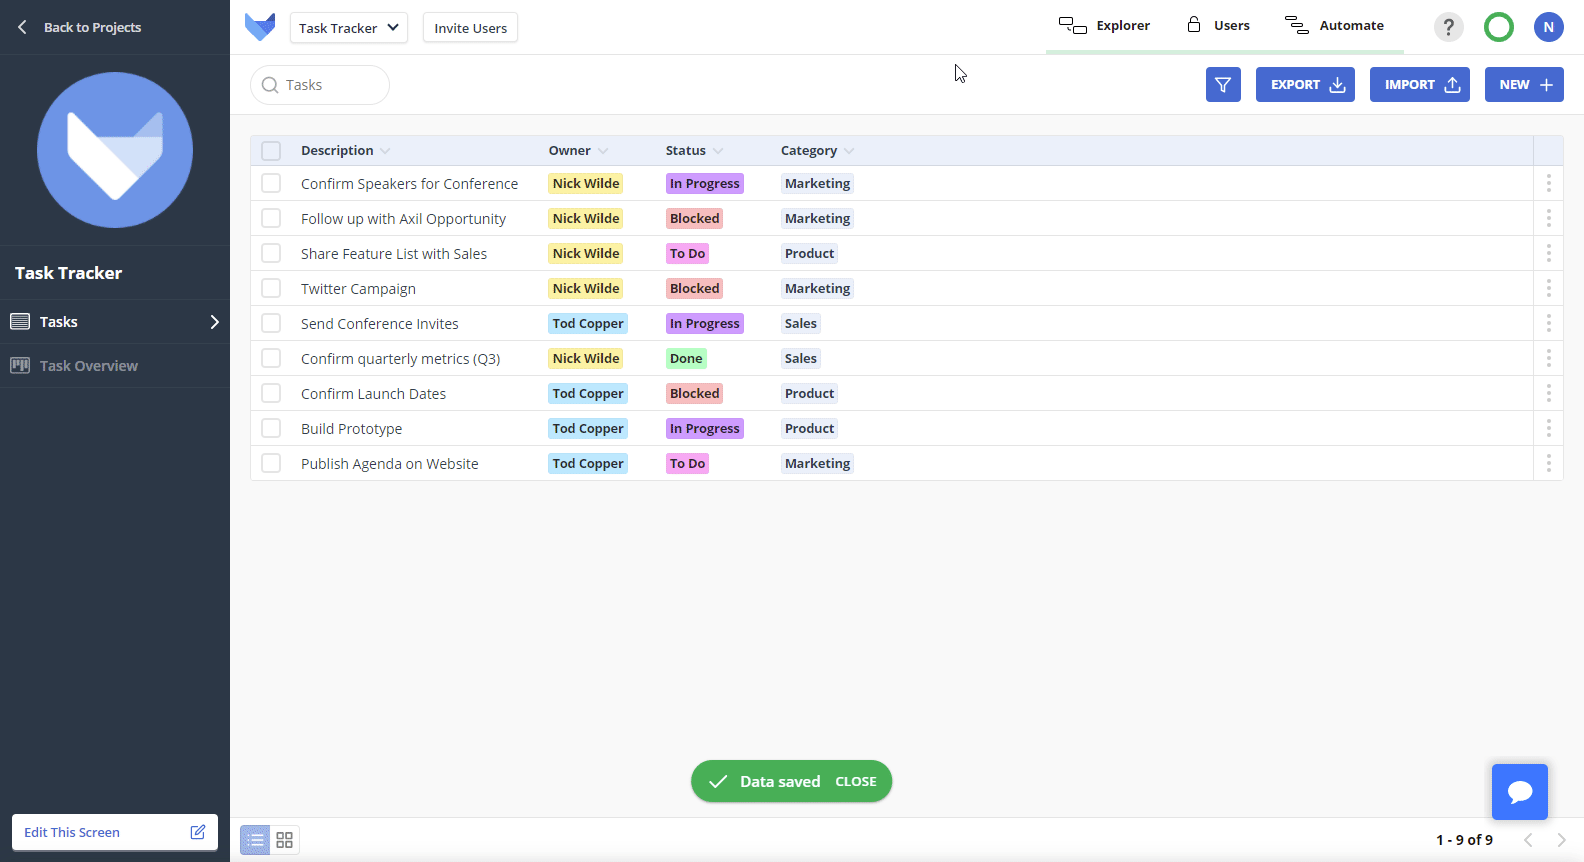 Add New Table in Explorer